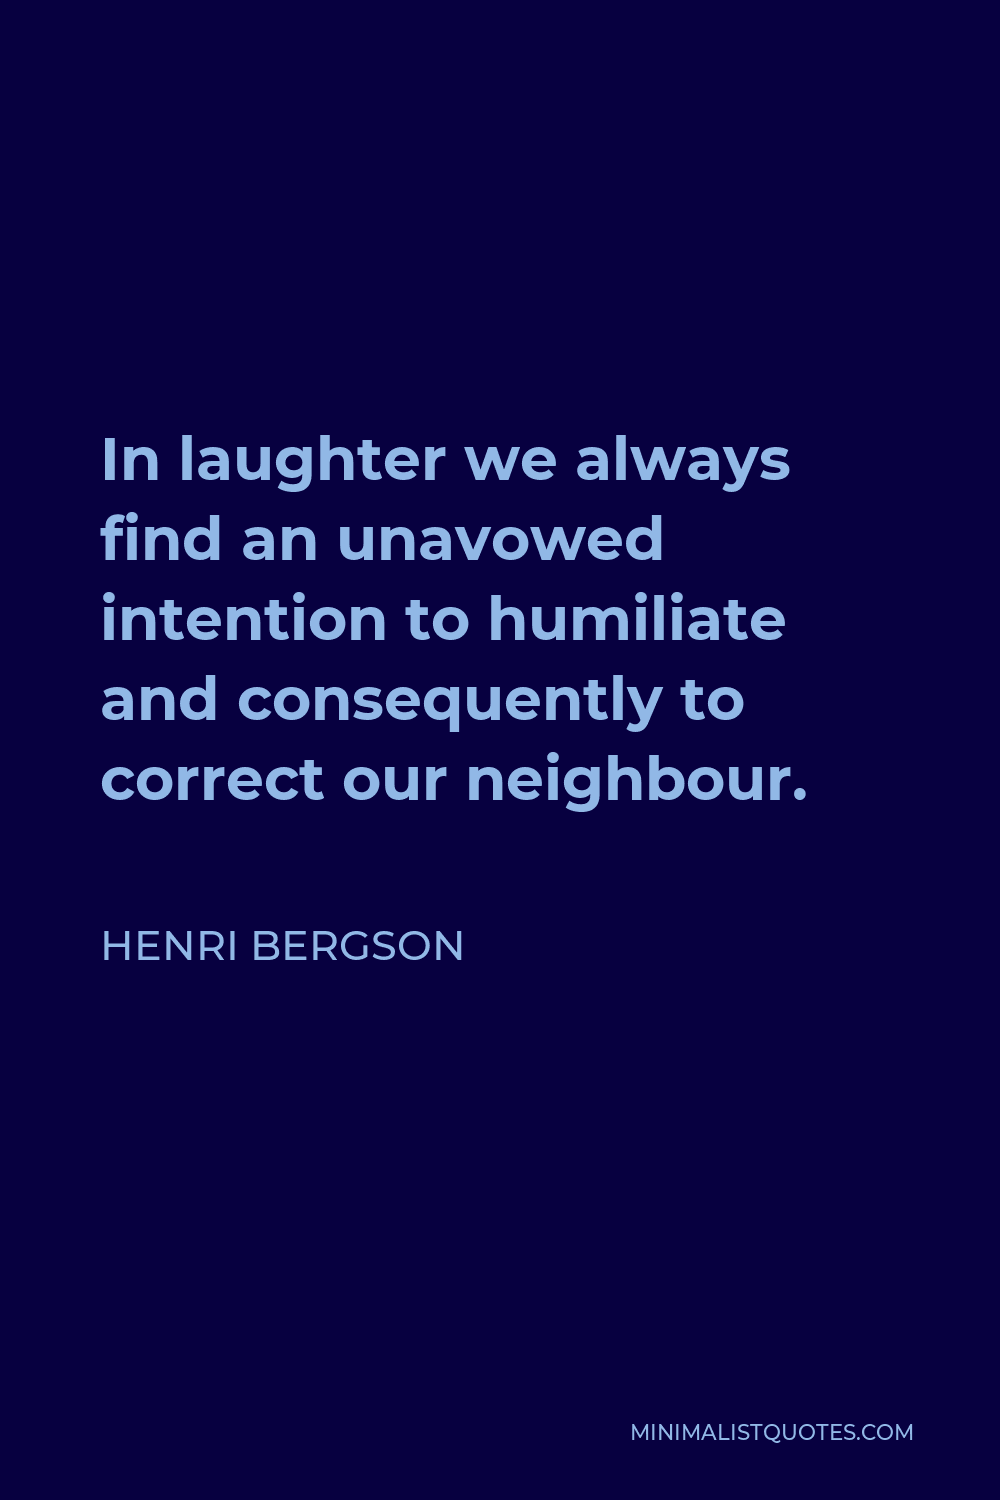 Henri Bergson Quote - In laughter we always find an unavowed intention to humiliate and consequently to correct our neighbour.